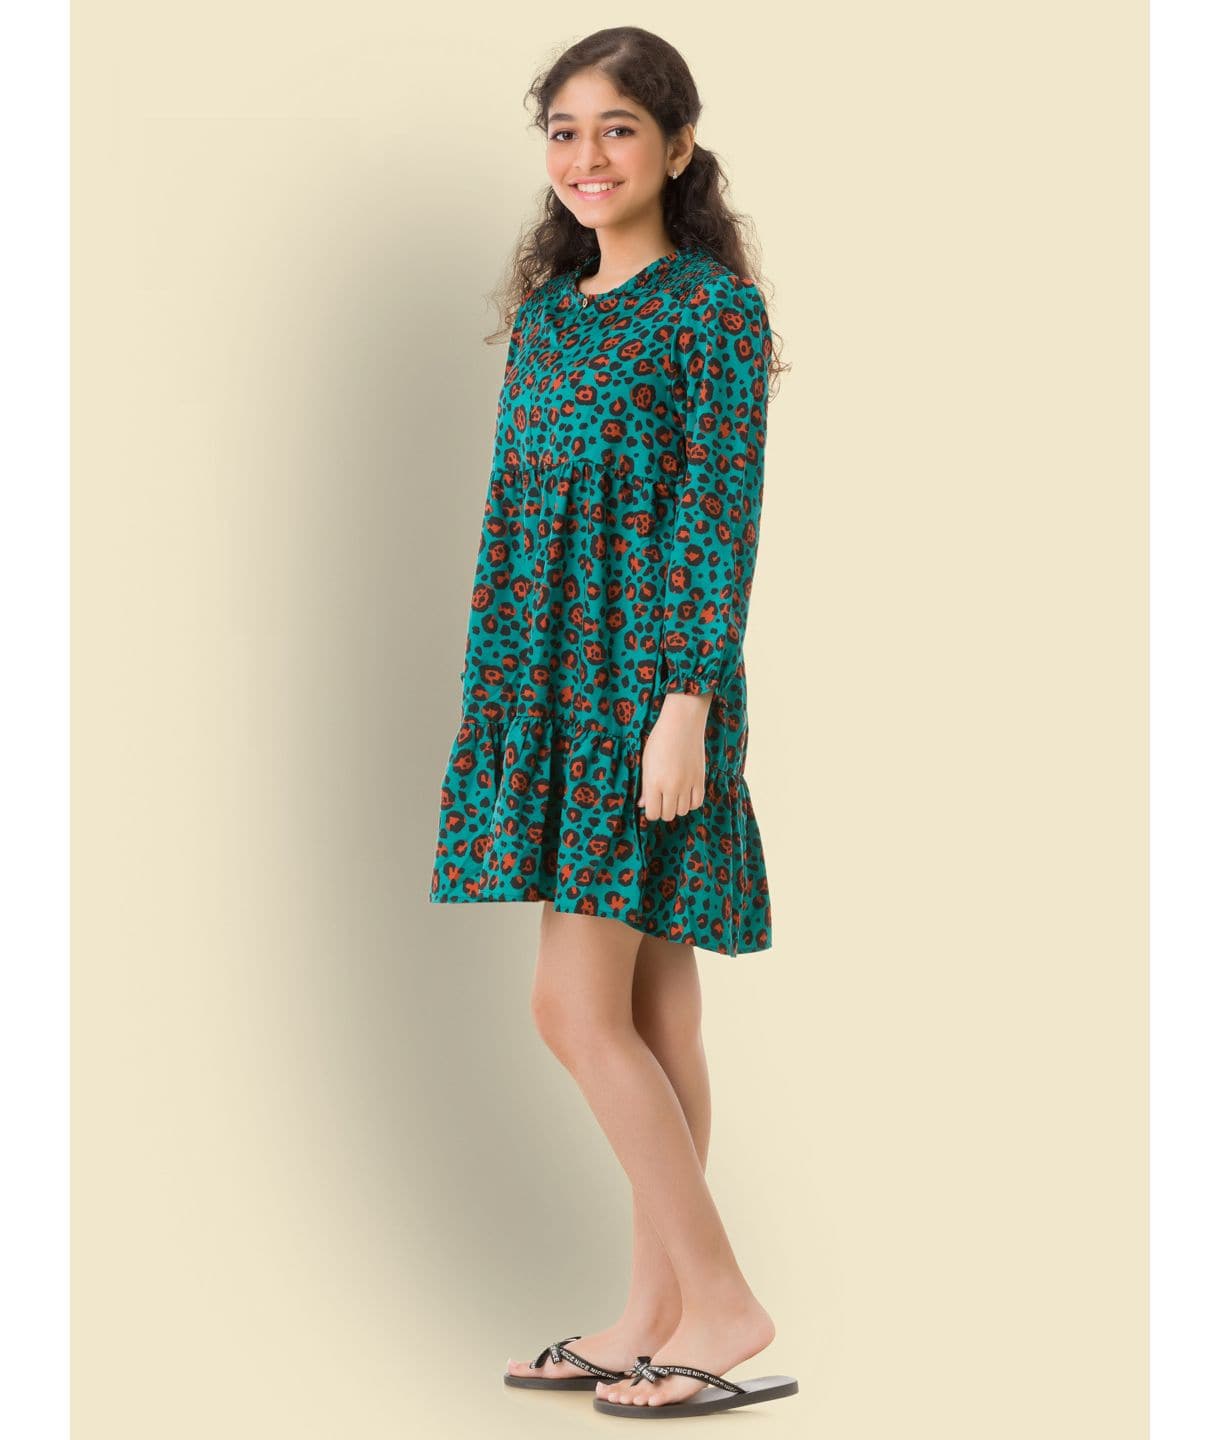 Cotton 3/4th Sleeves Dress for Girls - Uptownie